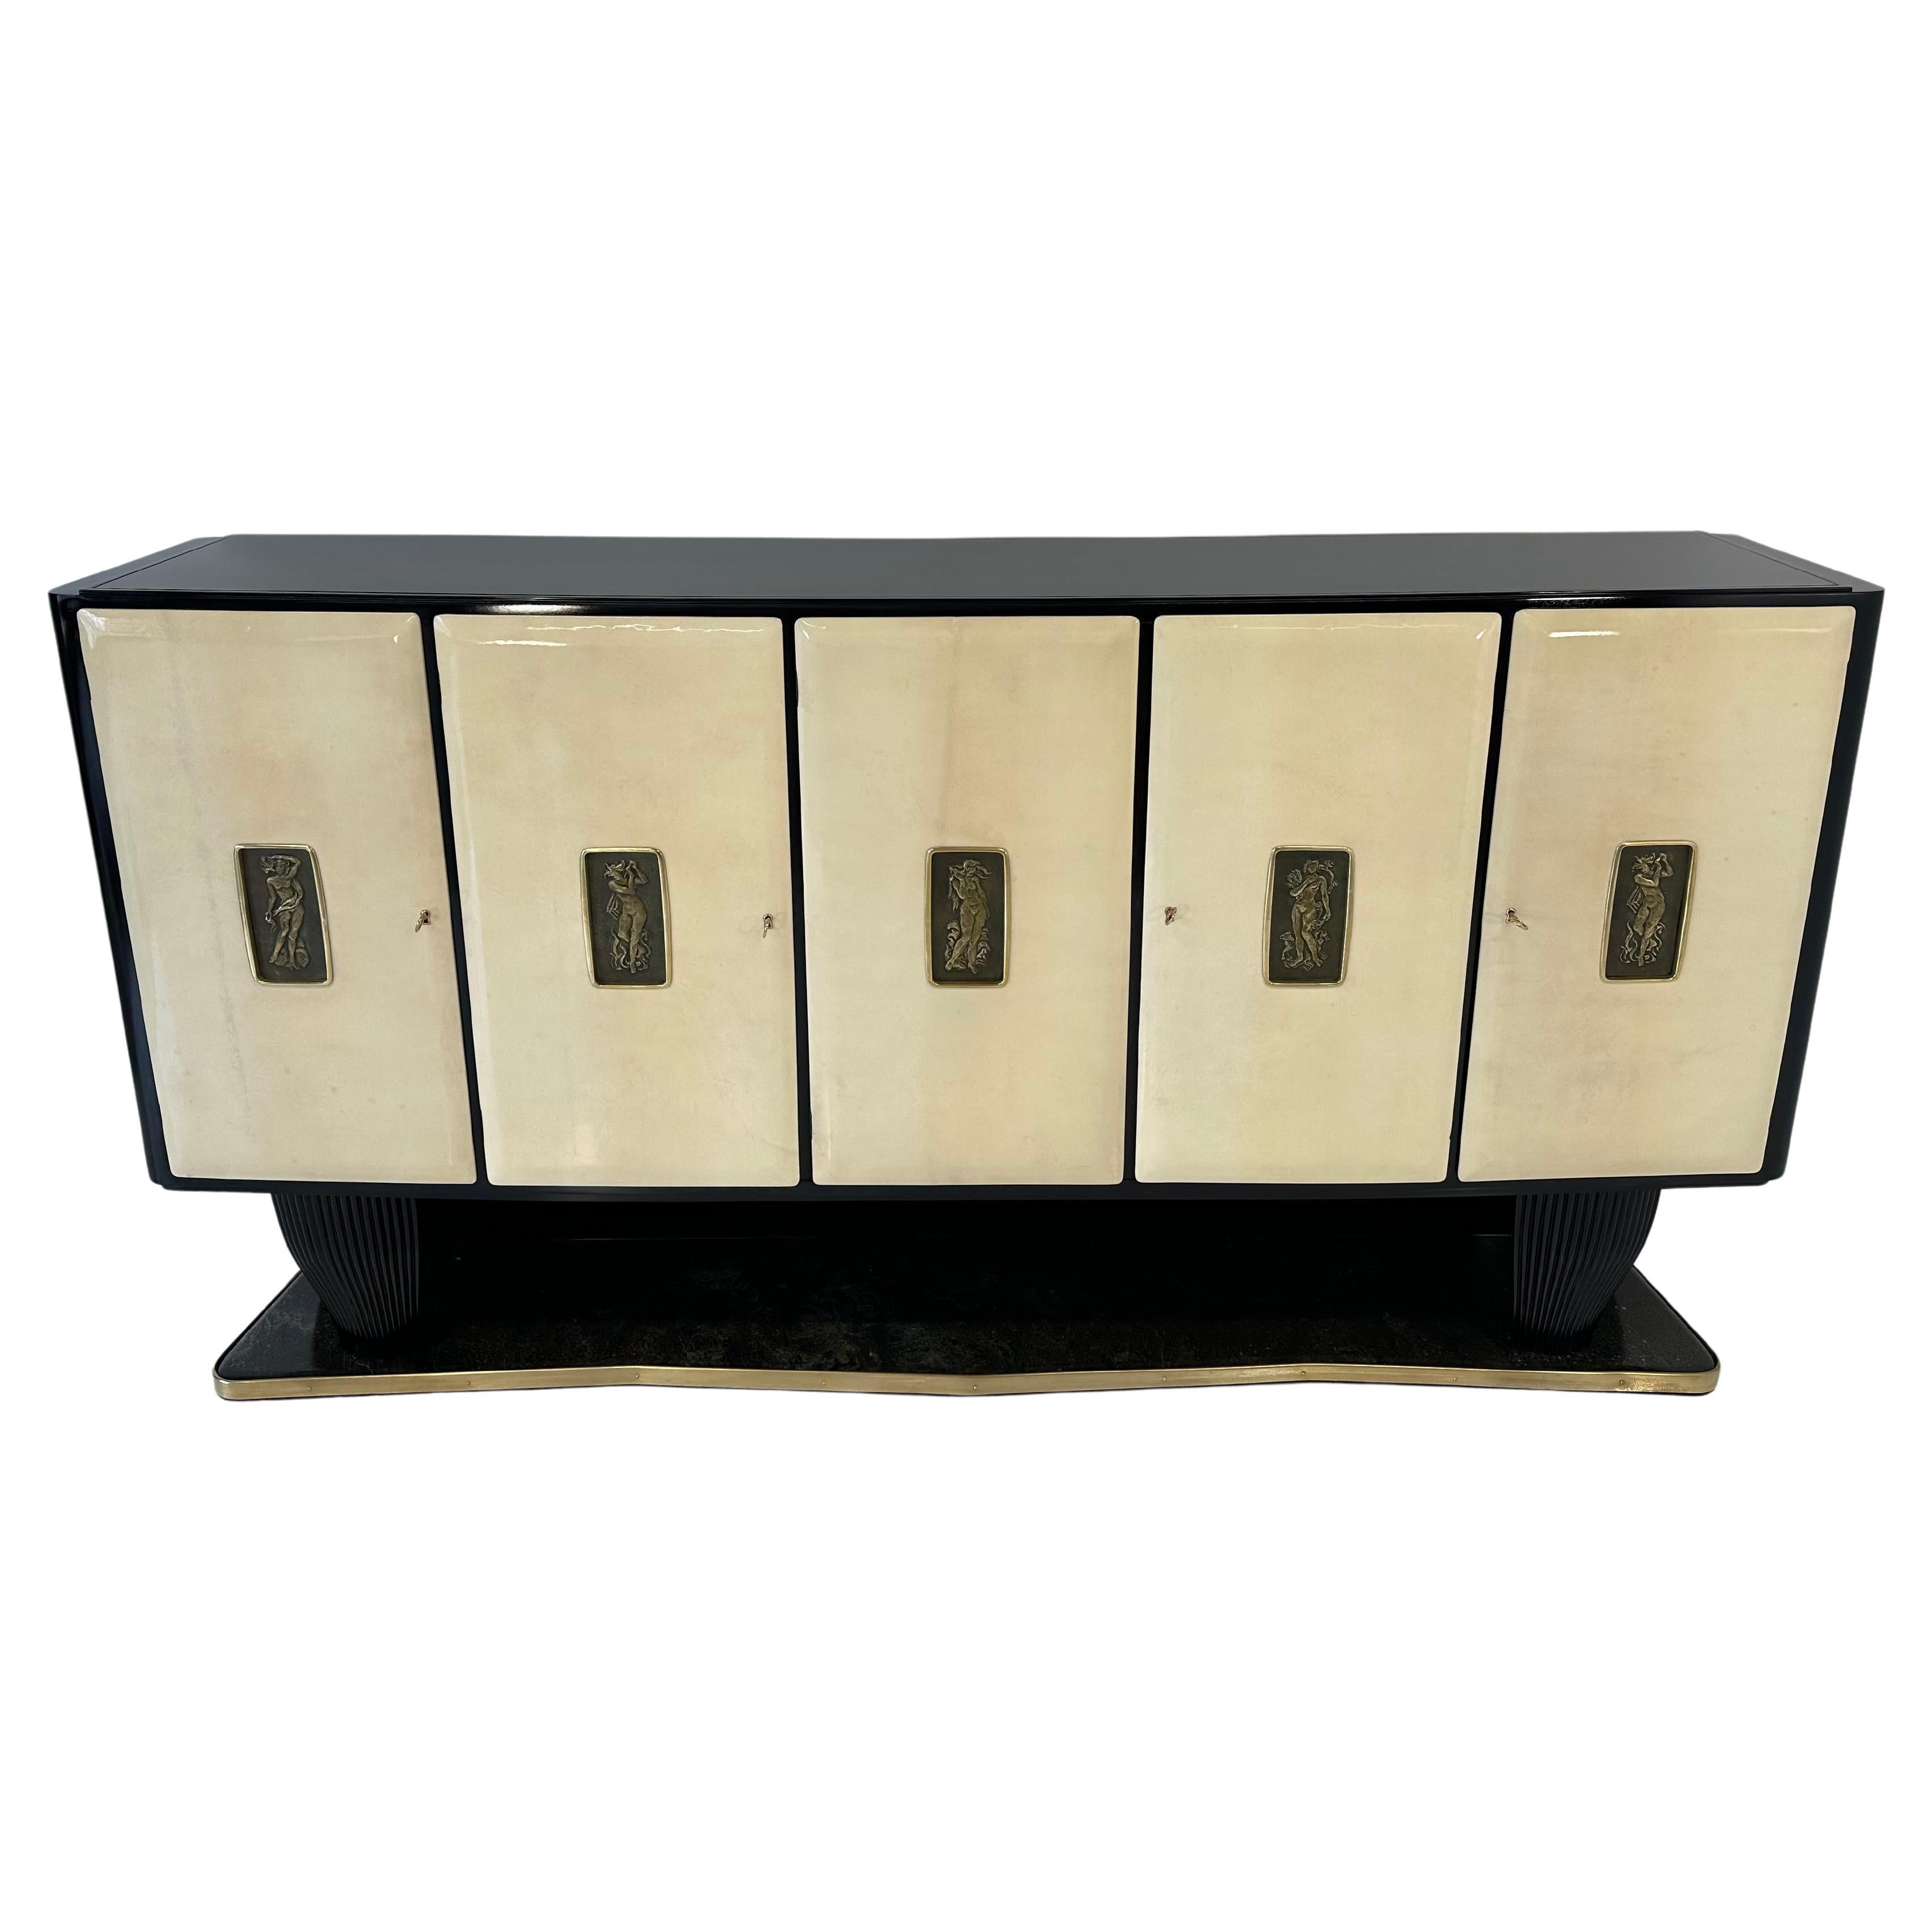 Italian Art Deco Parchment, Bronze and Black Sideboard By V. Dassi, 1940s